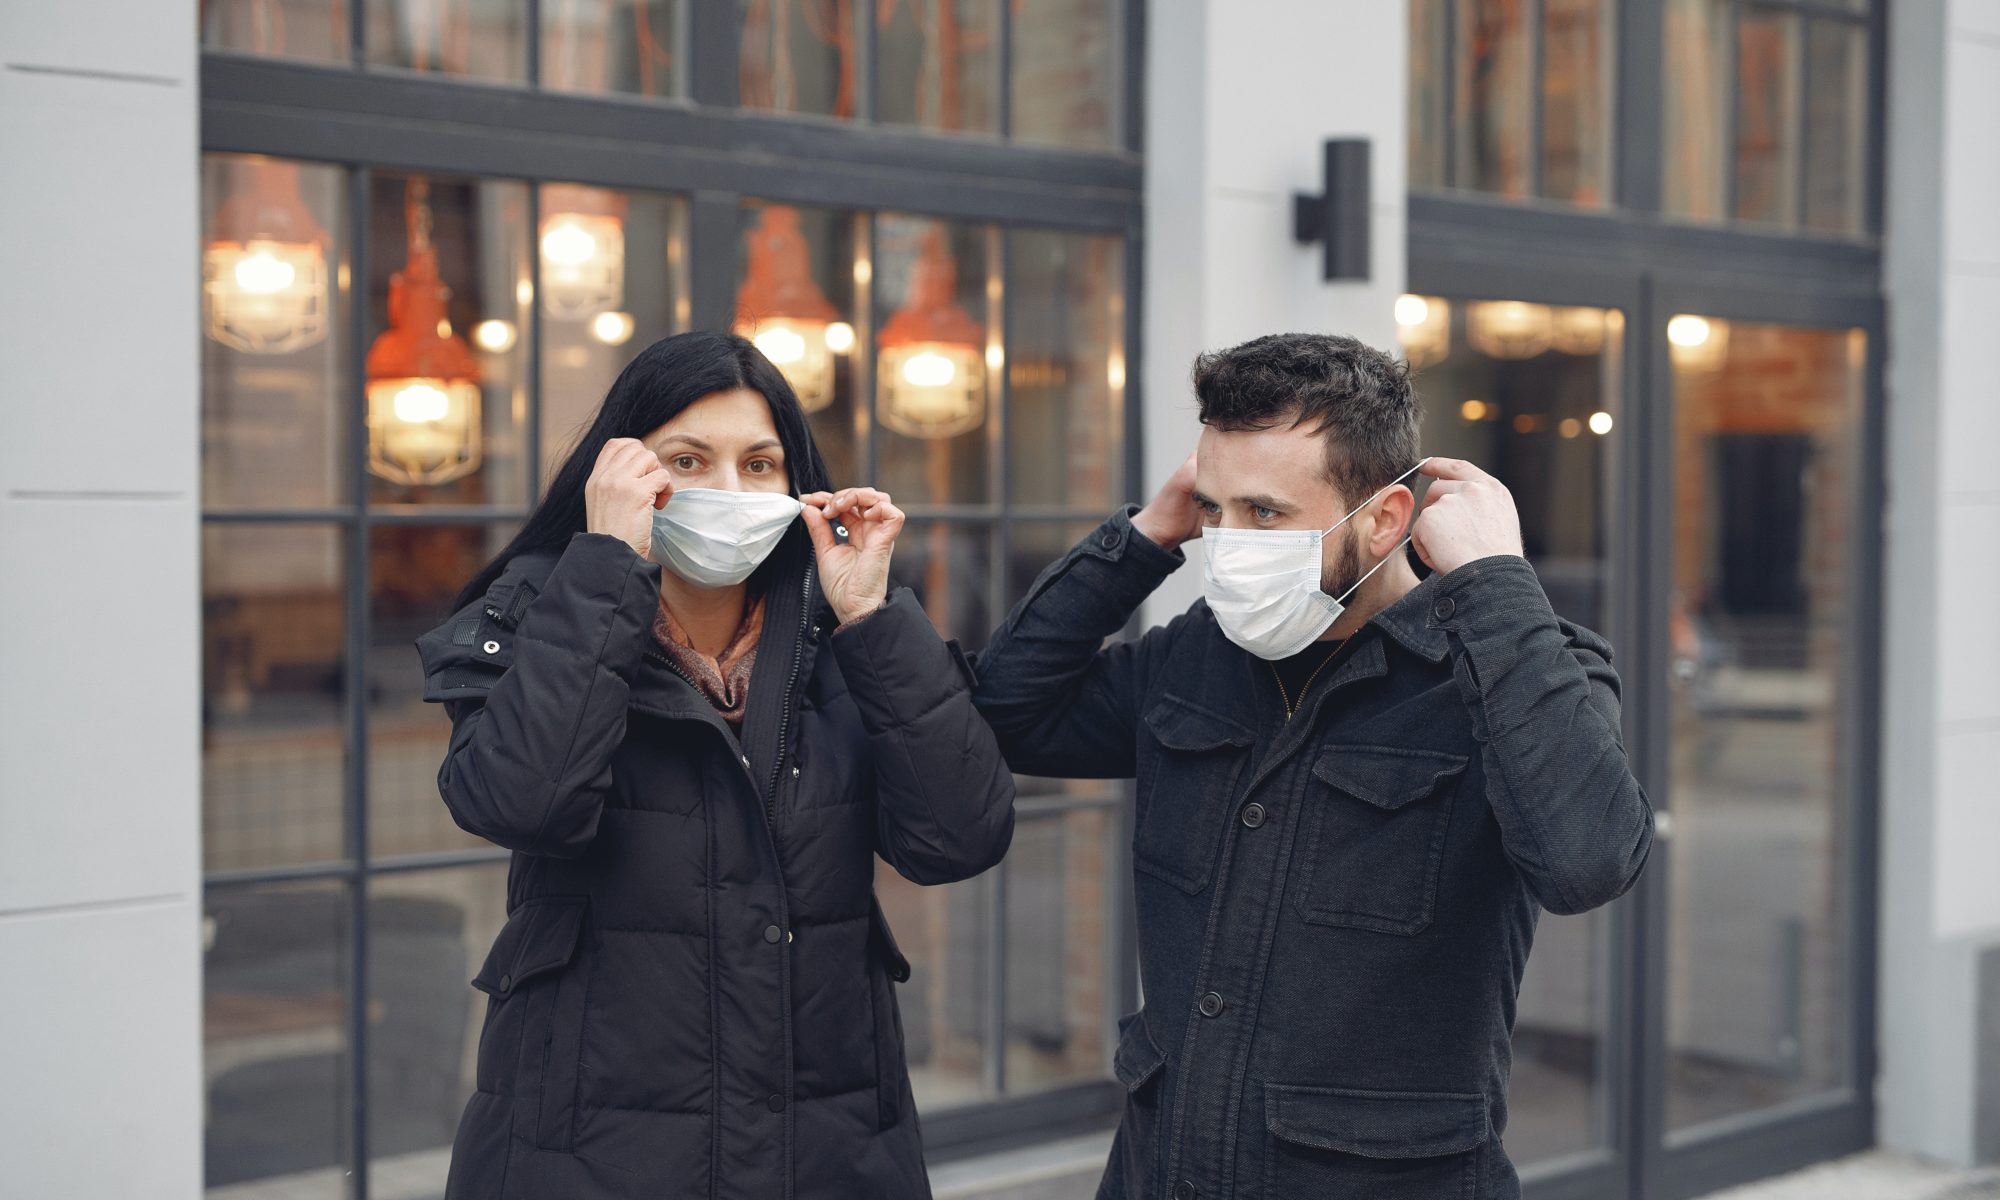 1 woman and 2 man wearing protective face masks